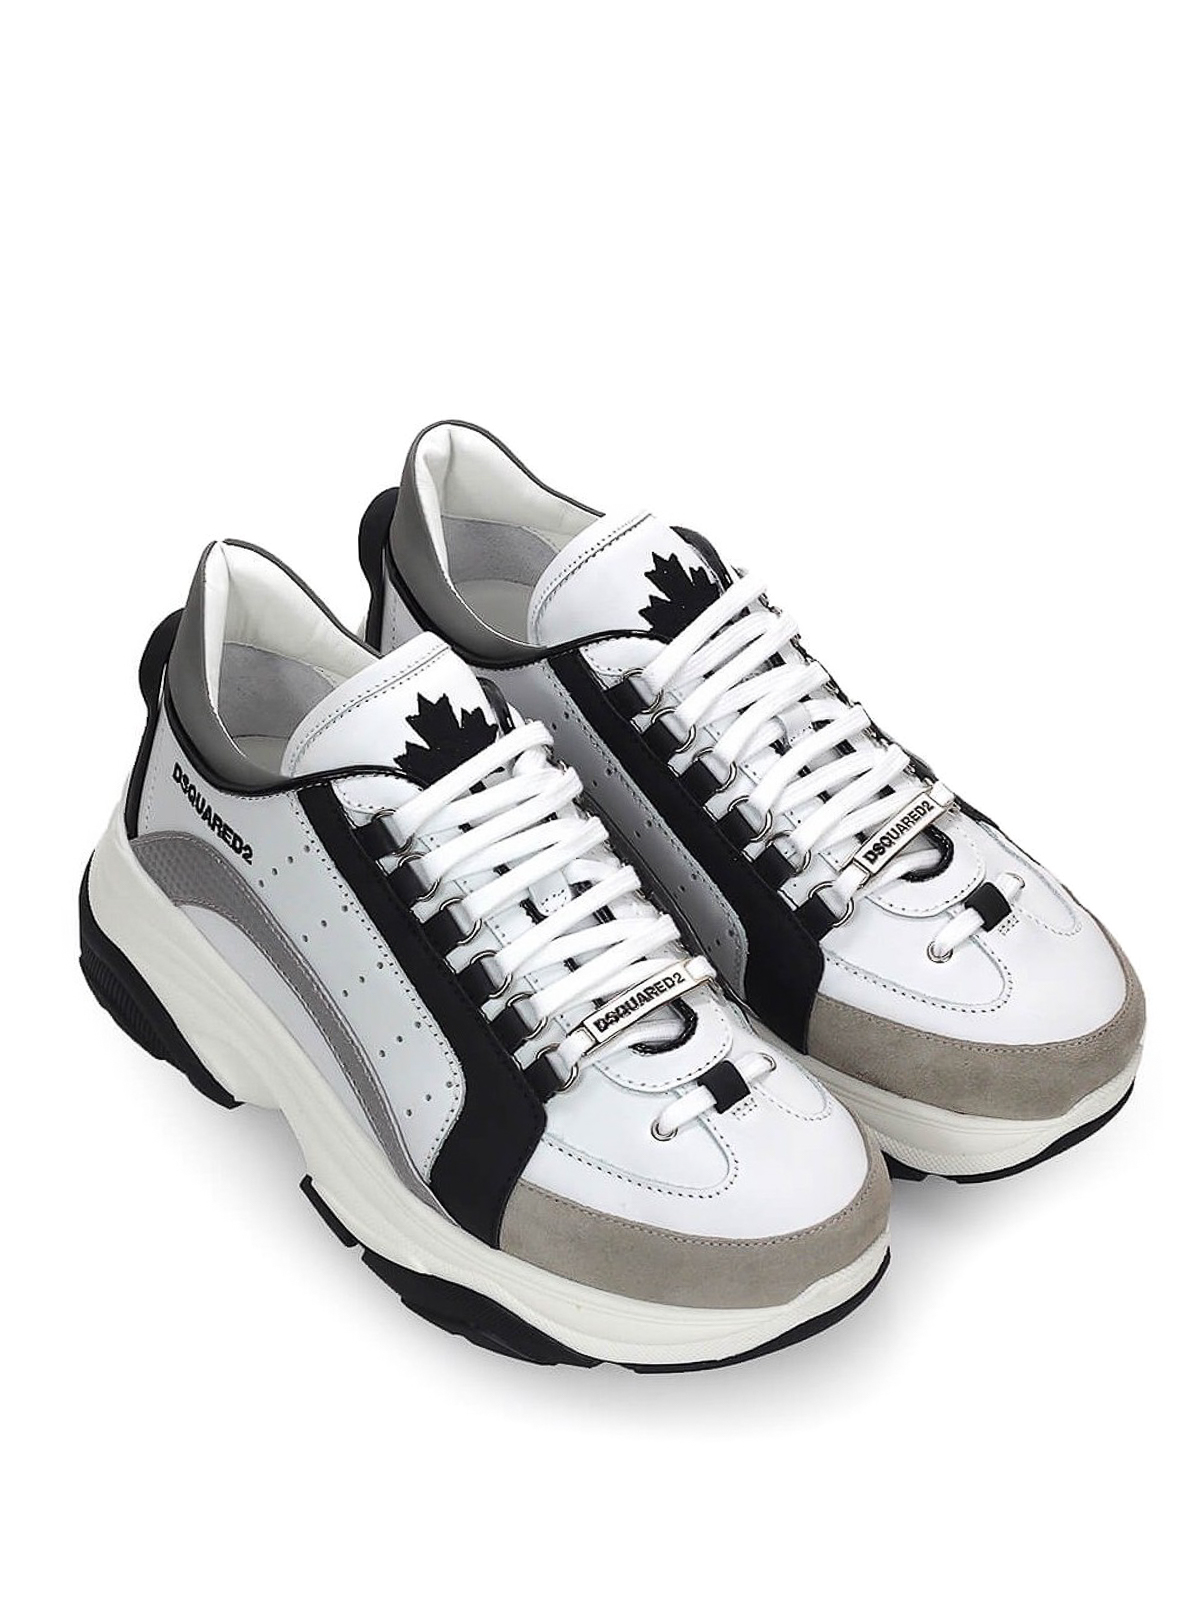 dsquared2 bumpy 551 sneakers